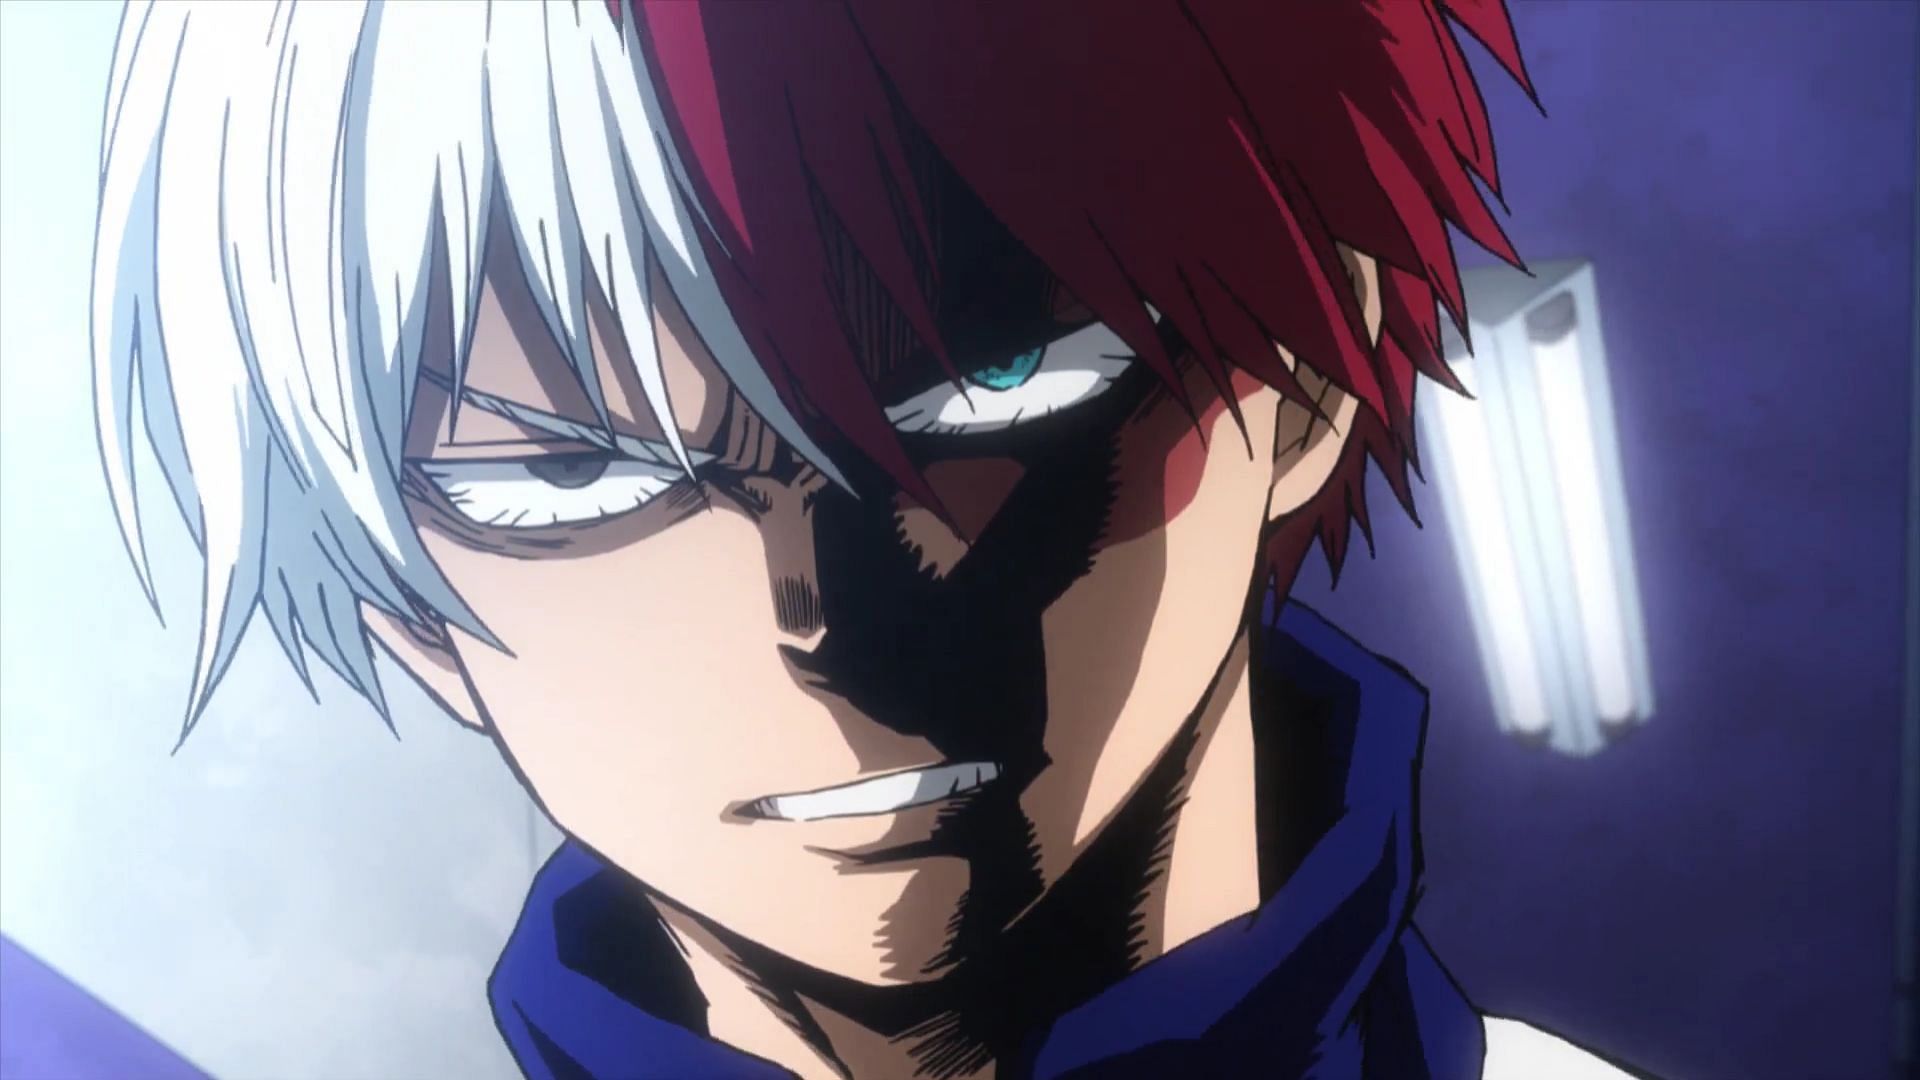 Shoto Todoroki seems to be in a bad state based in the upcoming chapter (Image via Bones)